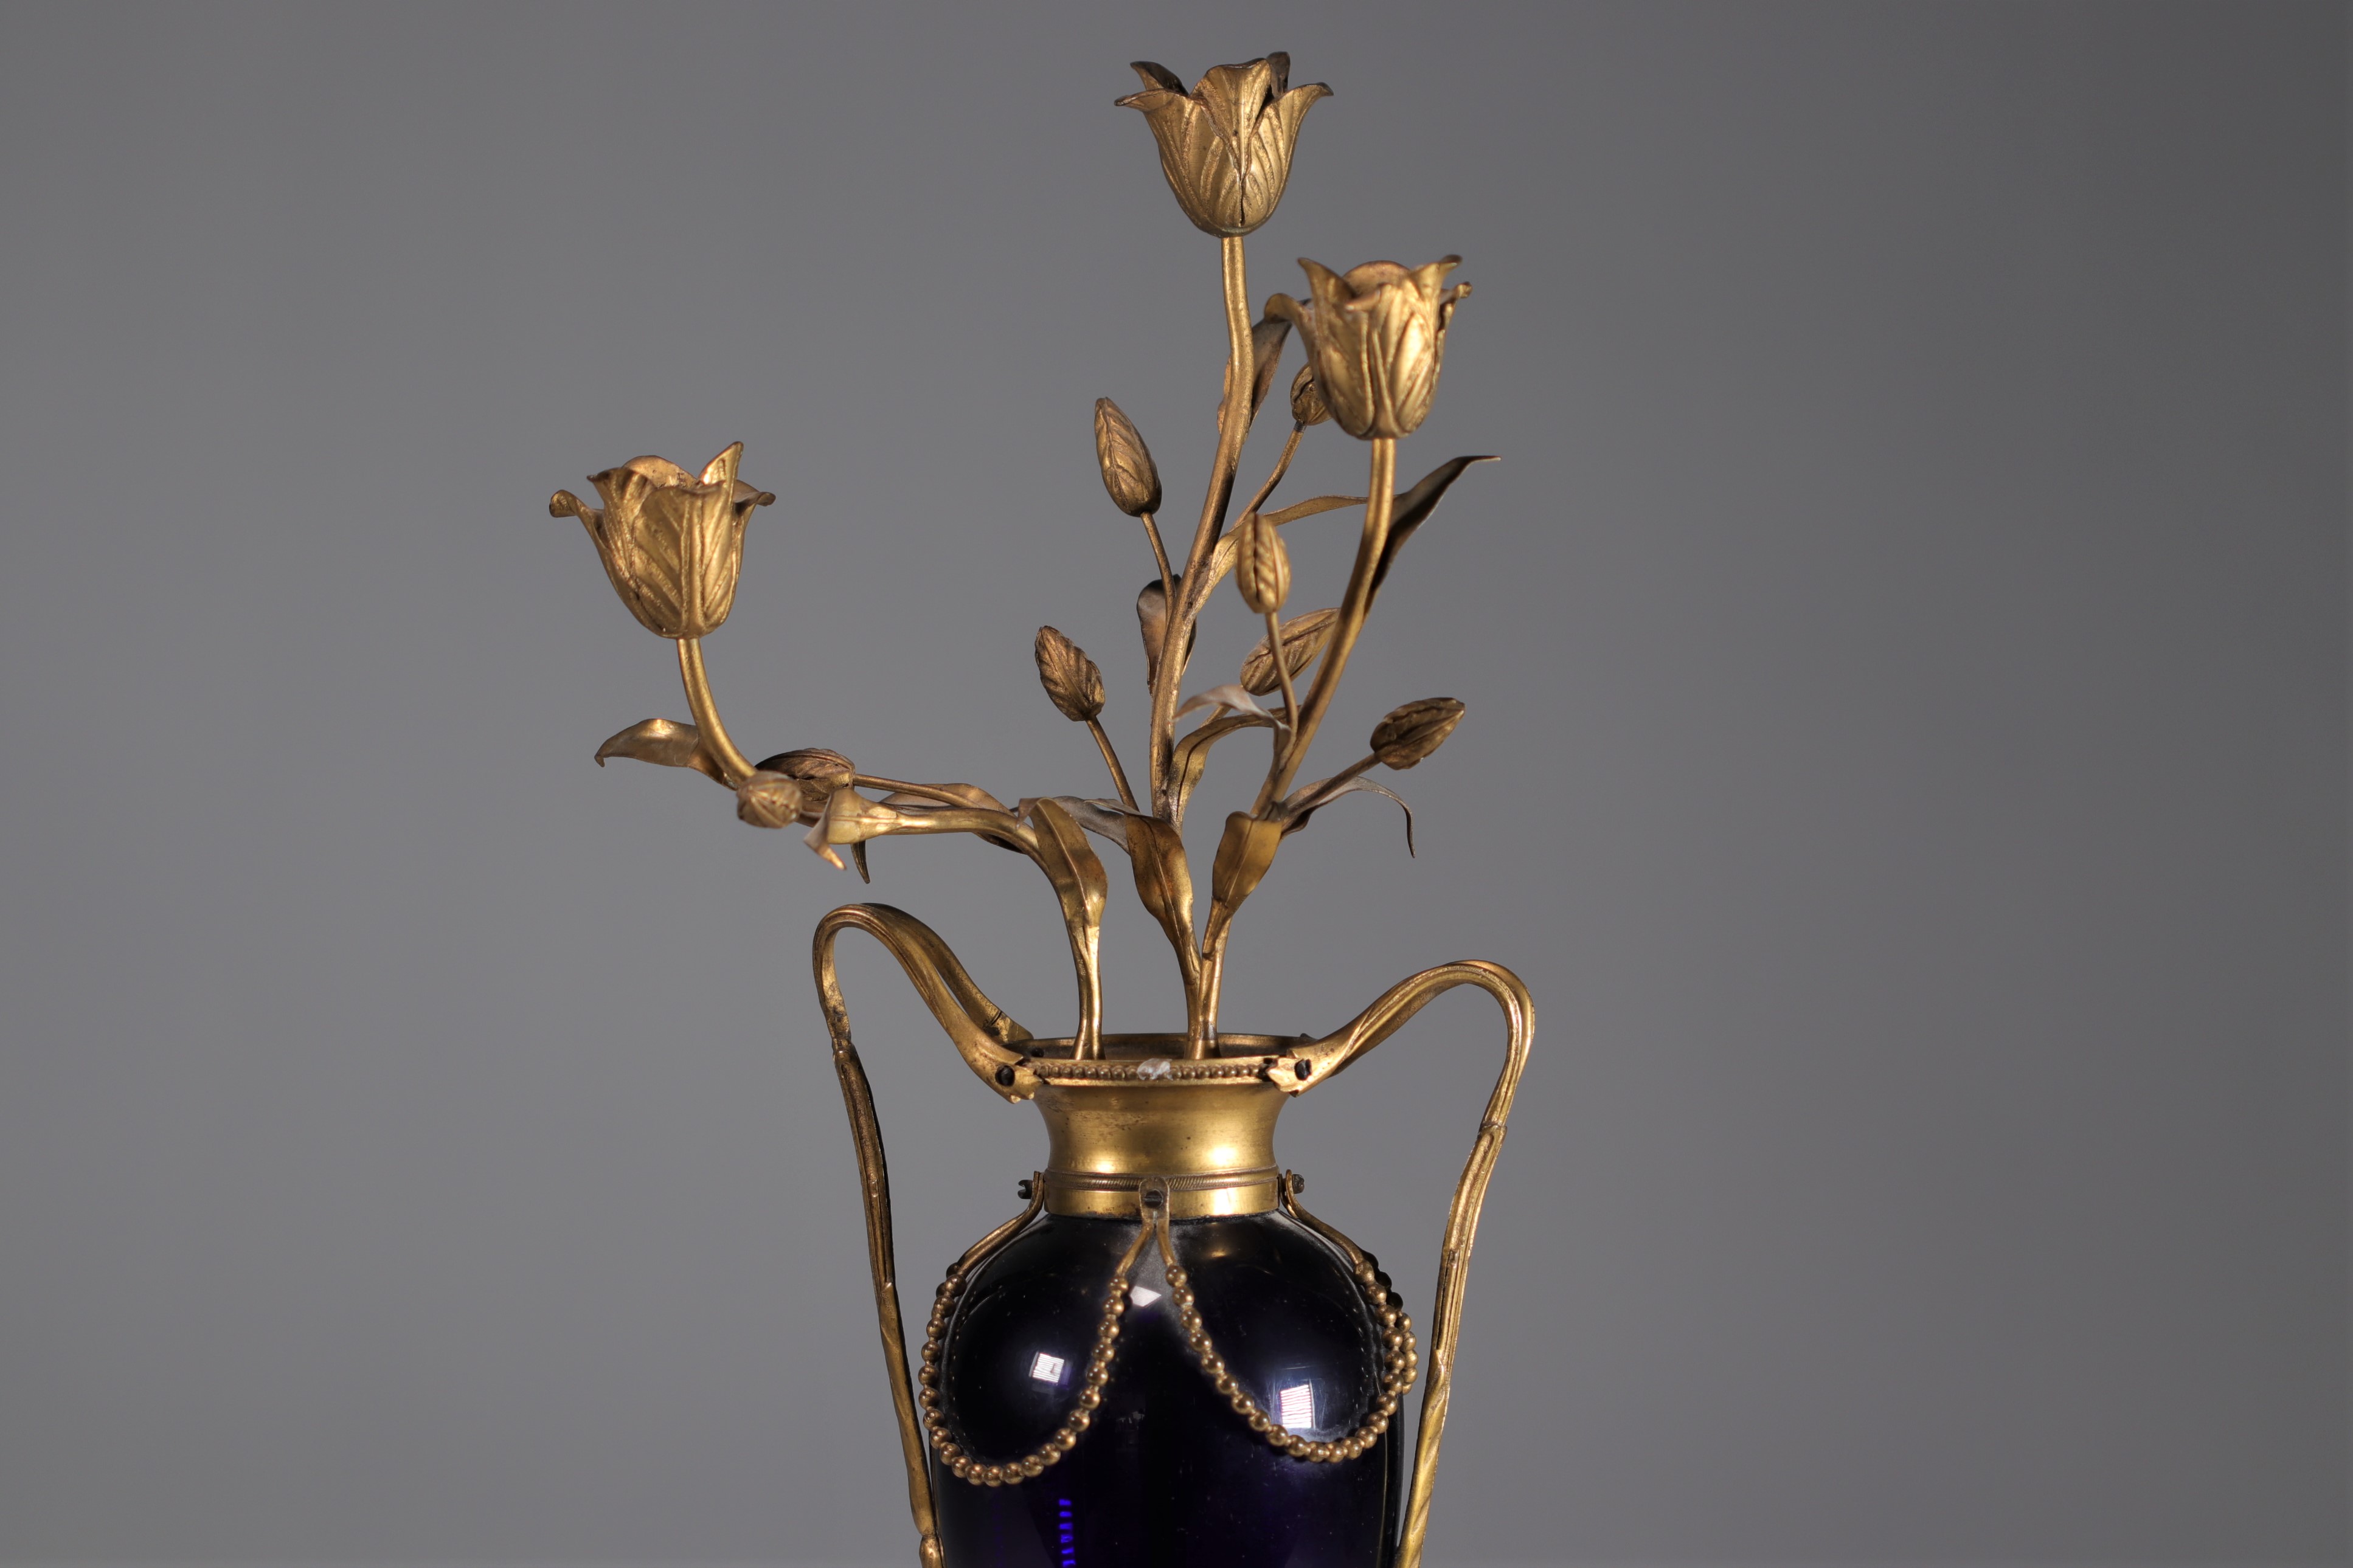 Pair of "candelabra" vases in Le Creusot blue glass and bronze, Louis XVI period - Image 5 of 5